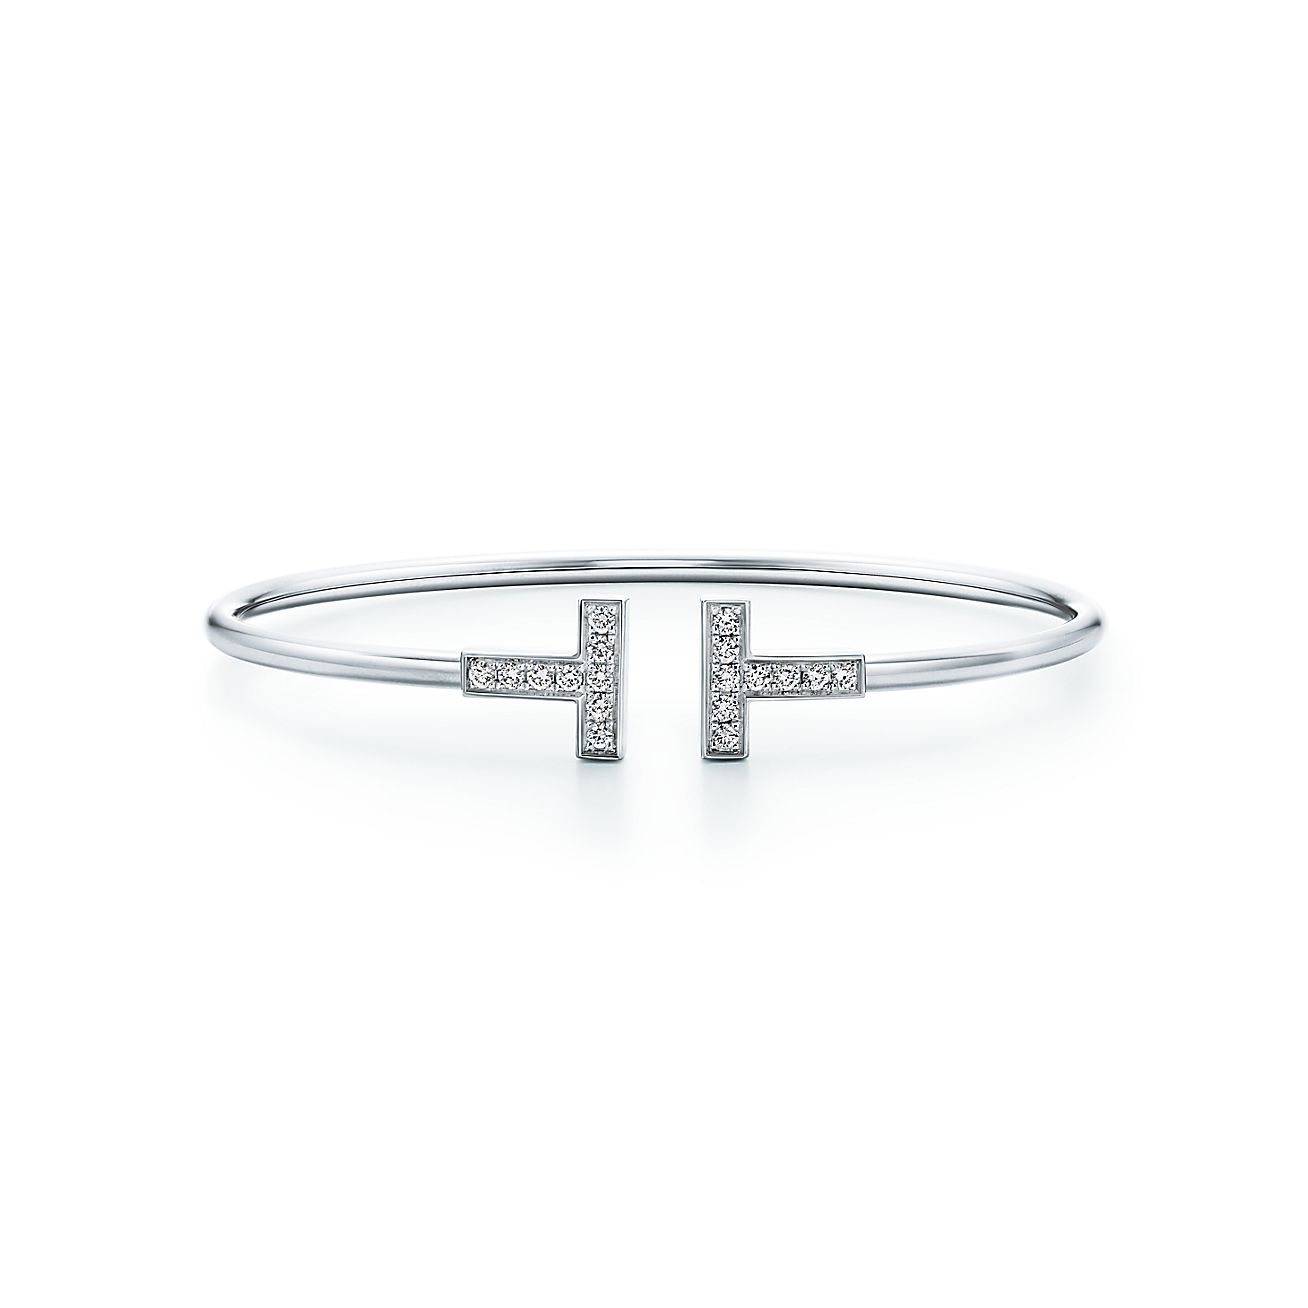 Tiffany and Co. Charm Bracelet with White Diamonds in Platinum at